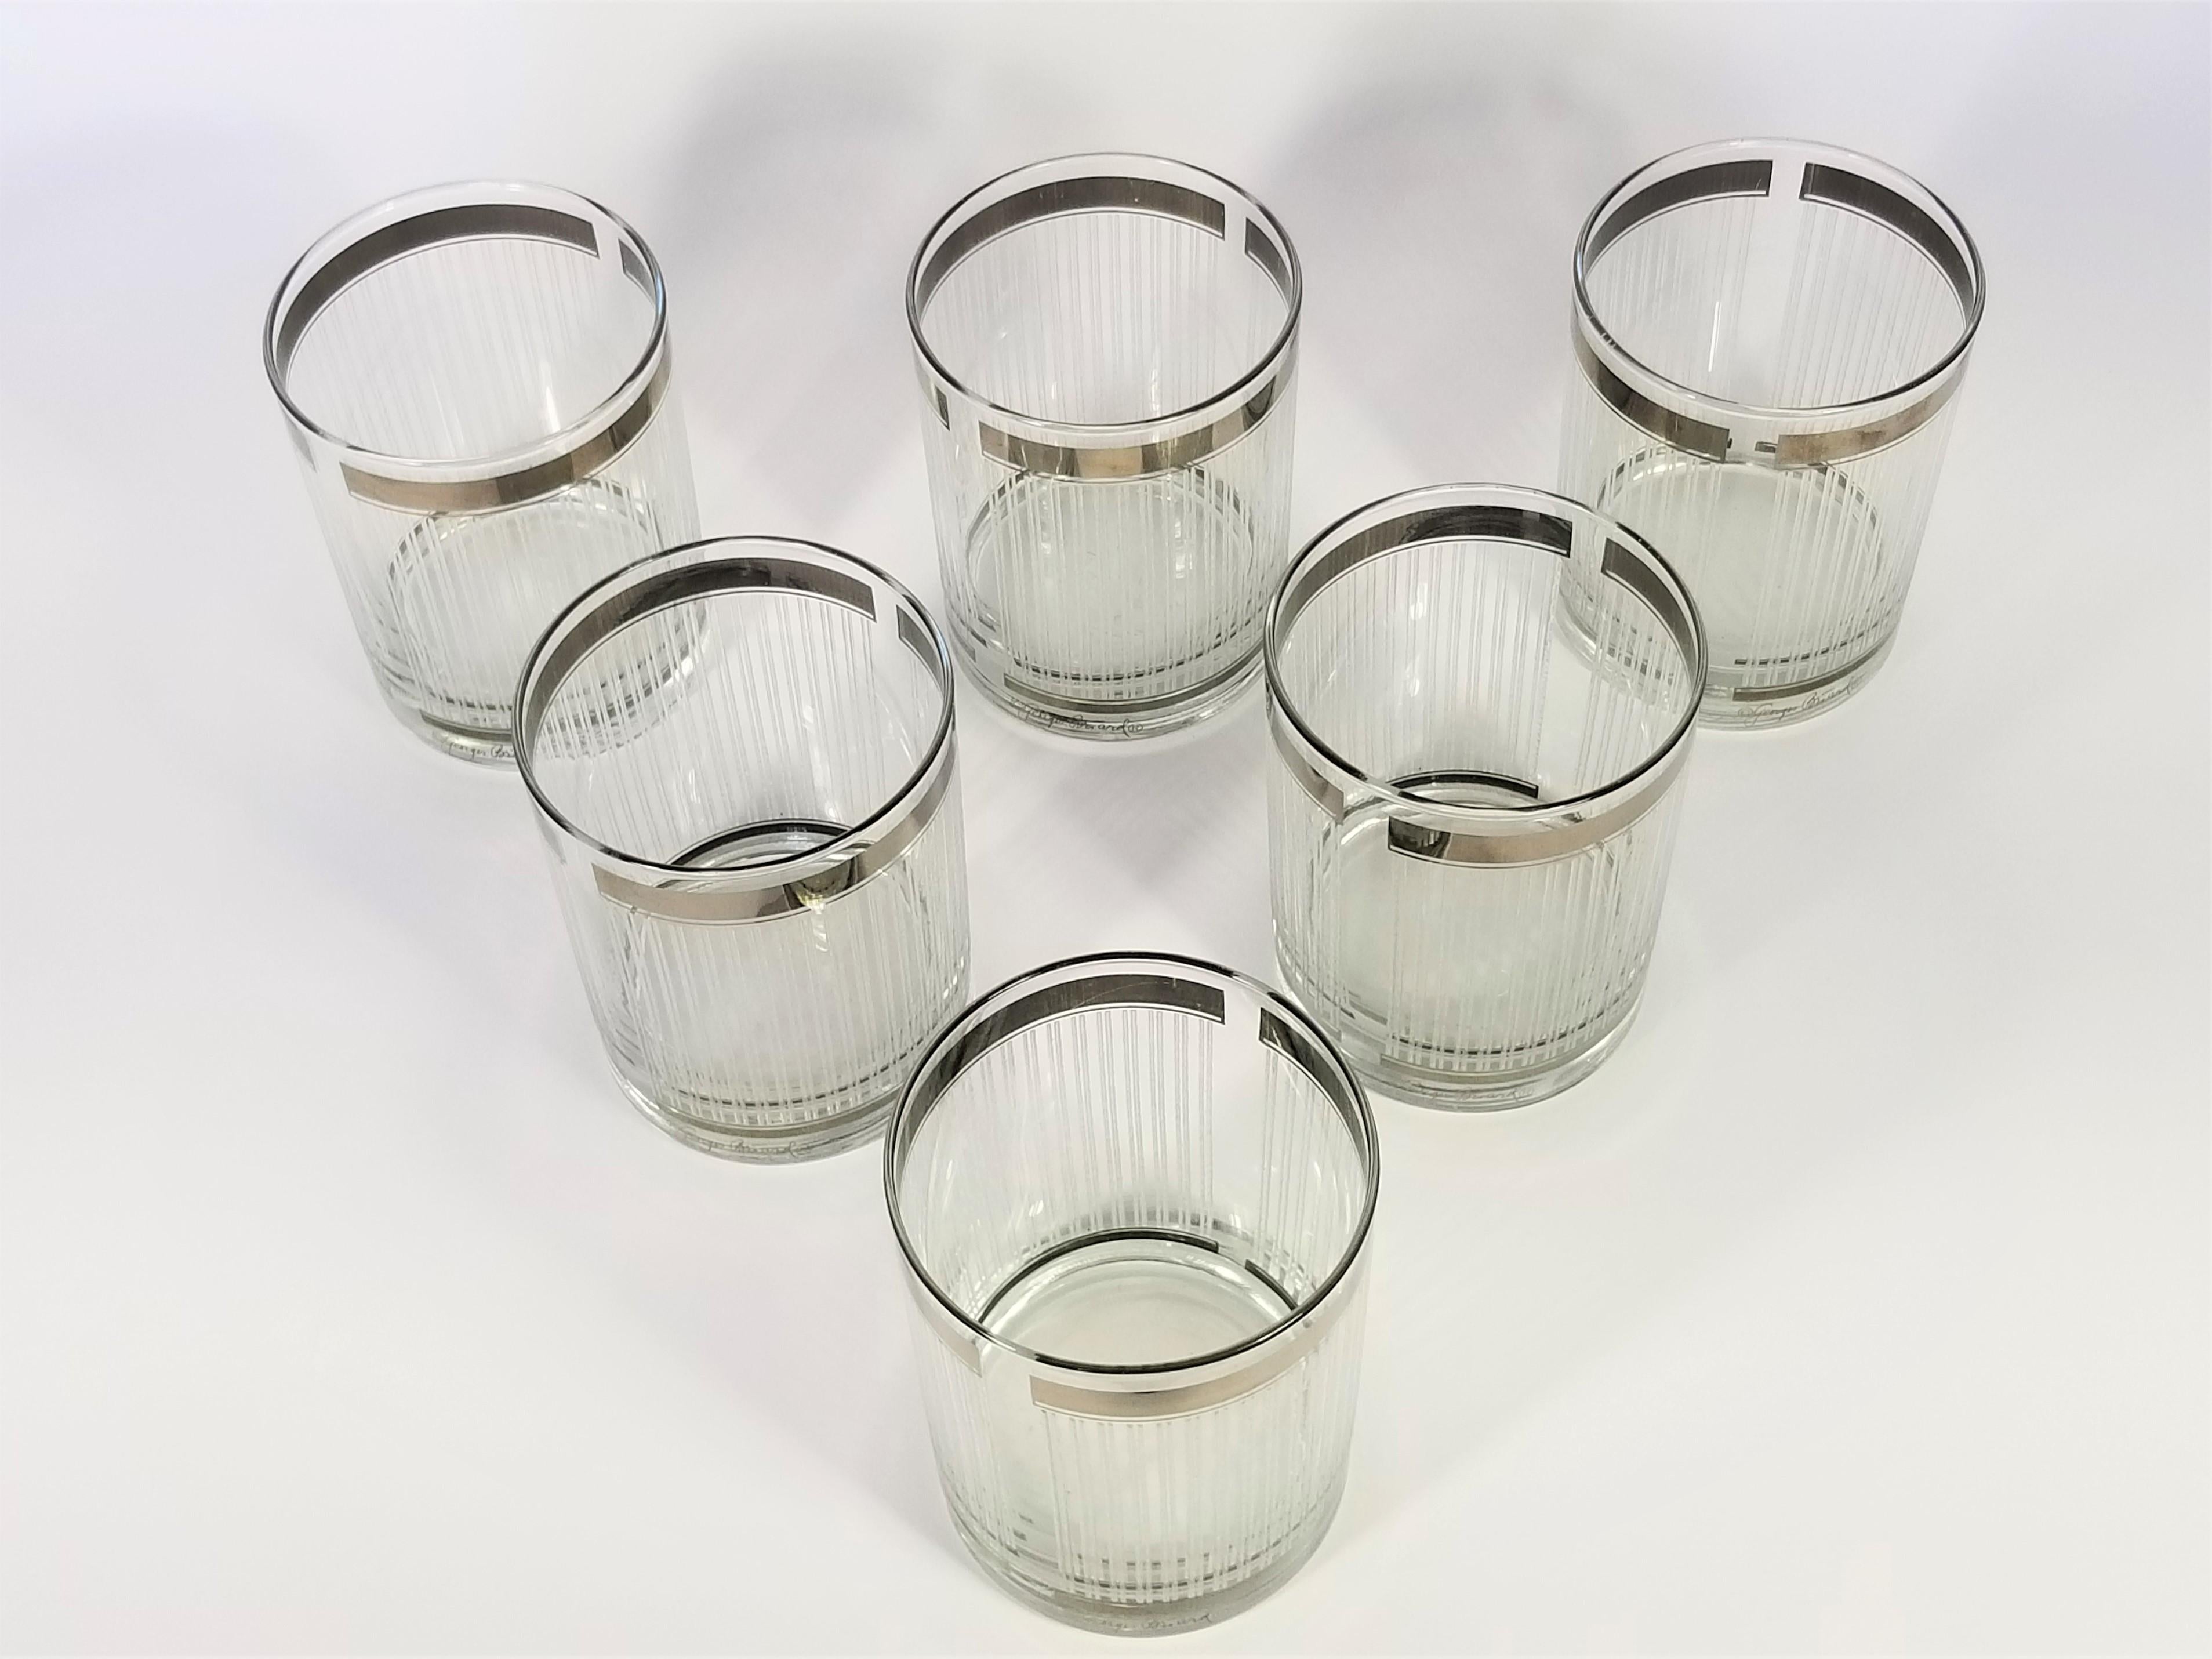 20th Century Georges Briard Signed Glassware or Barware Set of 6 Silver Midcentury